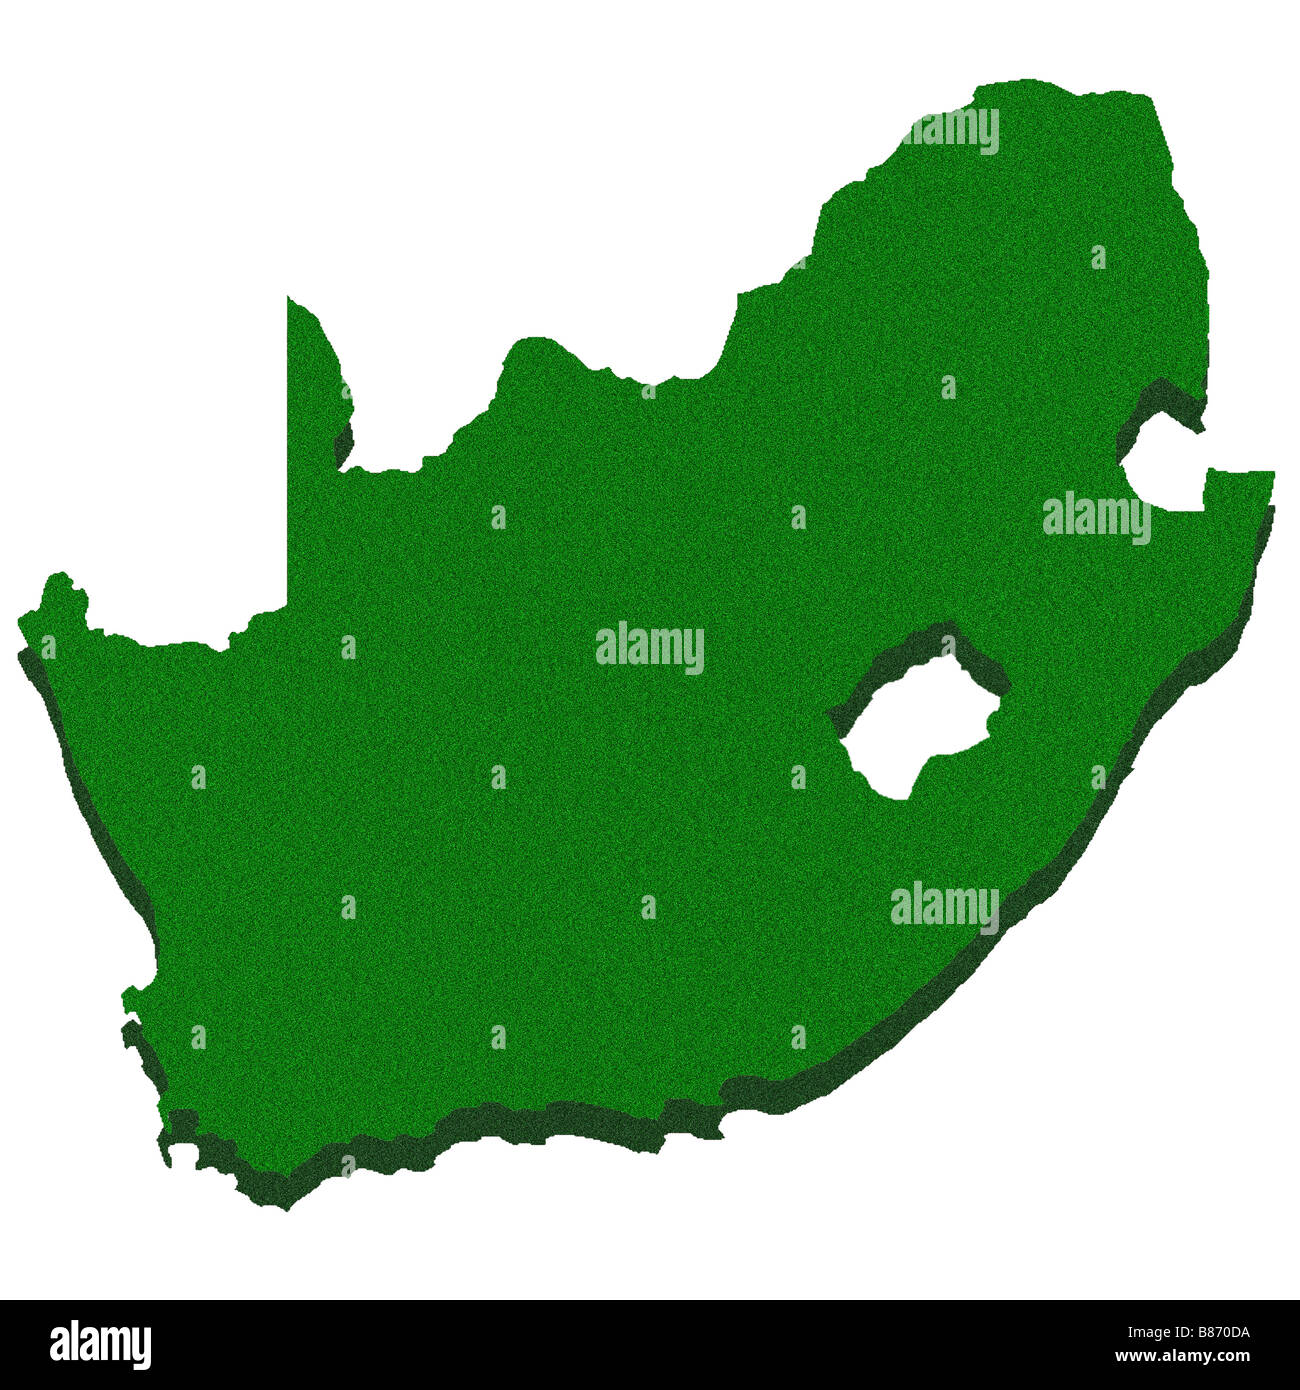 Outline map of South Africa Stock Photo